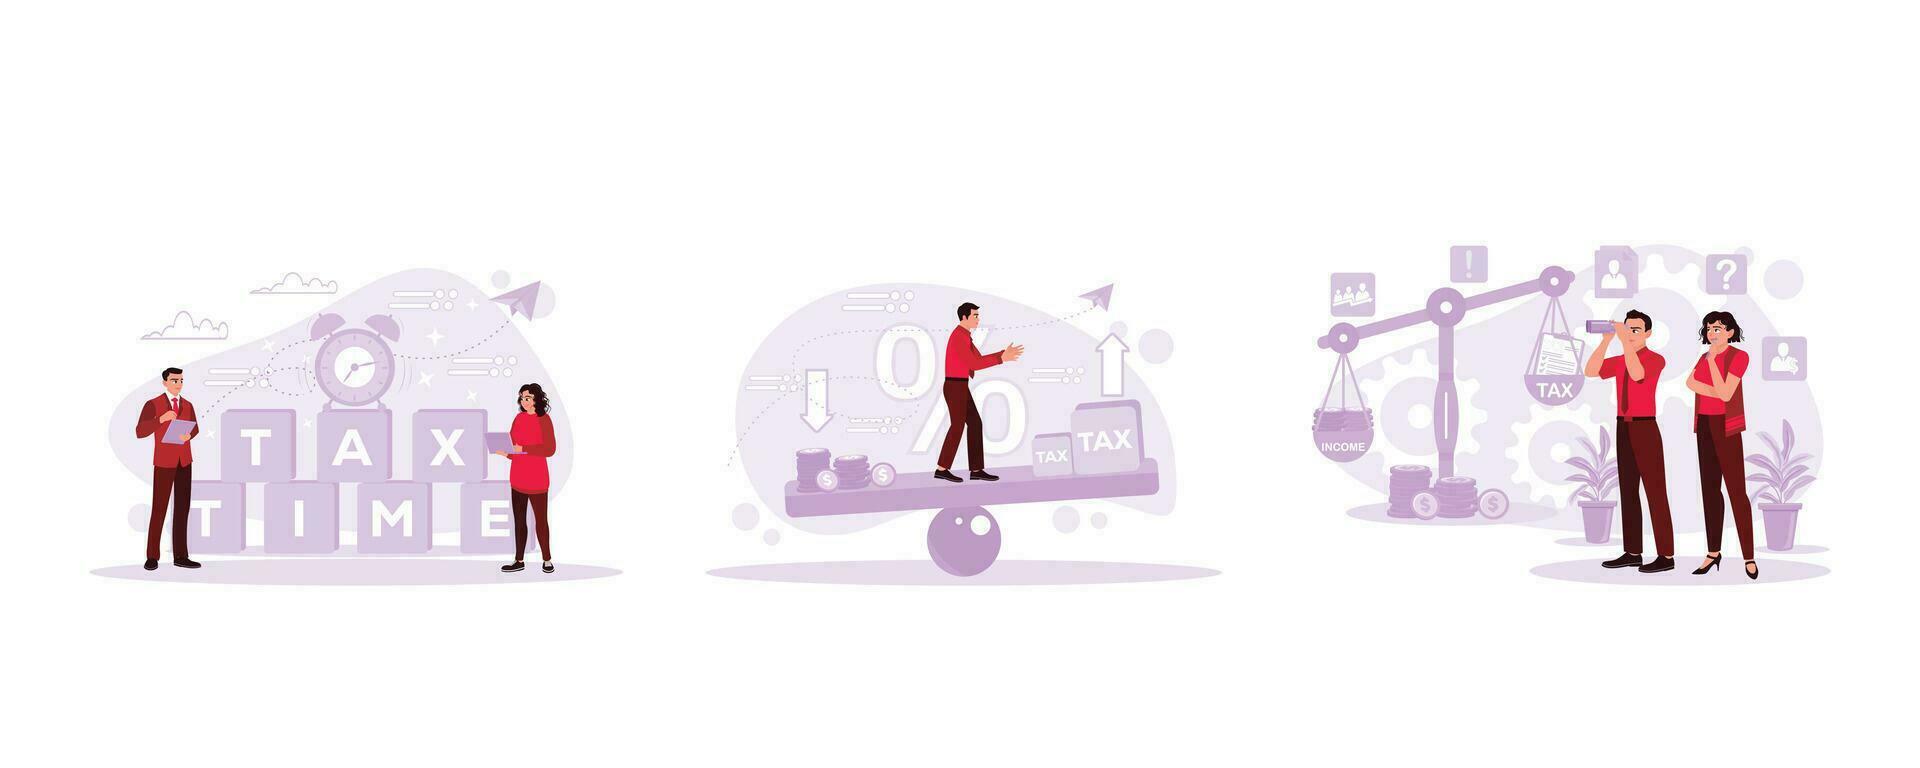 Two people were standing against tax time background. Entrepreneurs strike a balance between taxes and income. In the background, the woman and man use binoculars against tax and income scales. vector